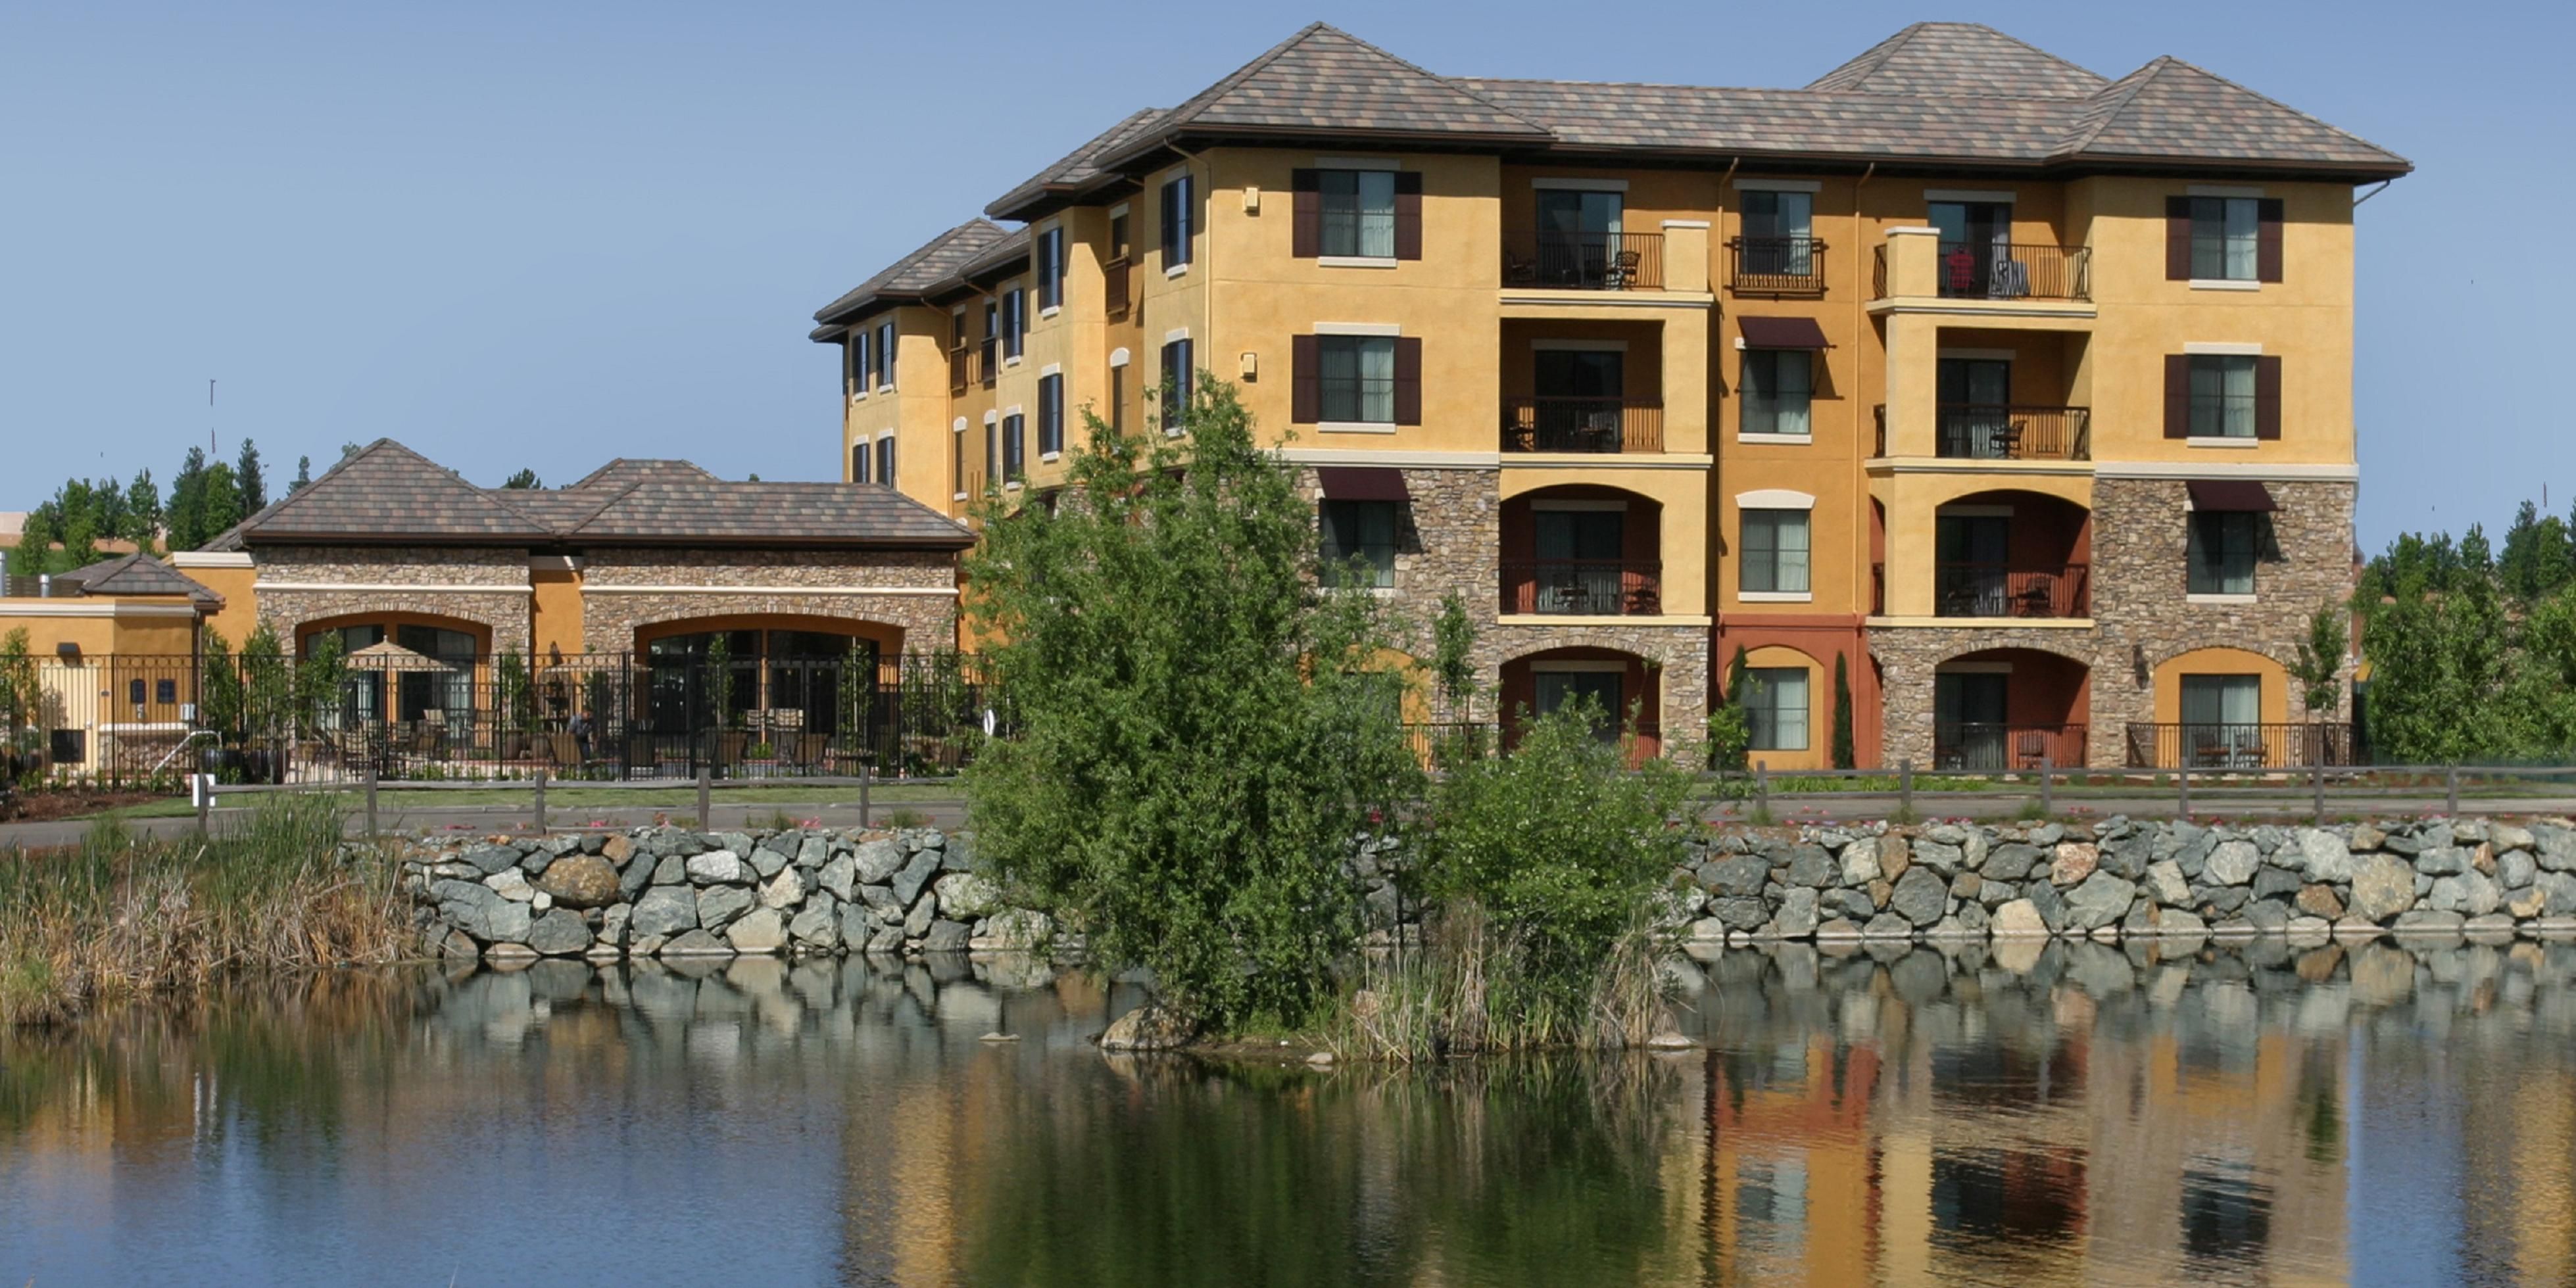 We have an assortment of suites available that have patios, pool view, and water view of the Town Center pond. 